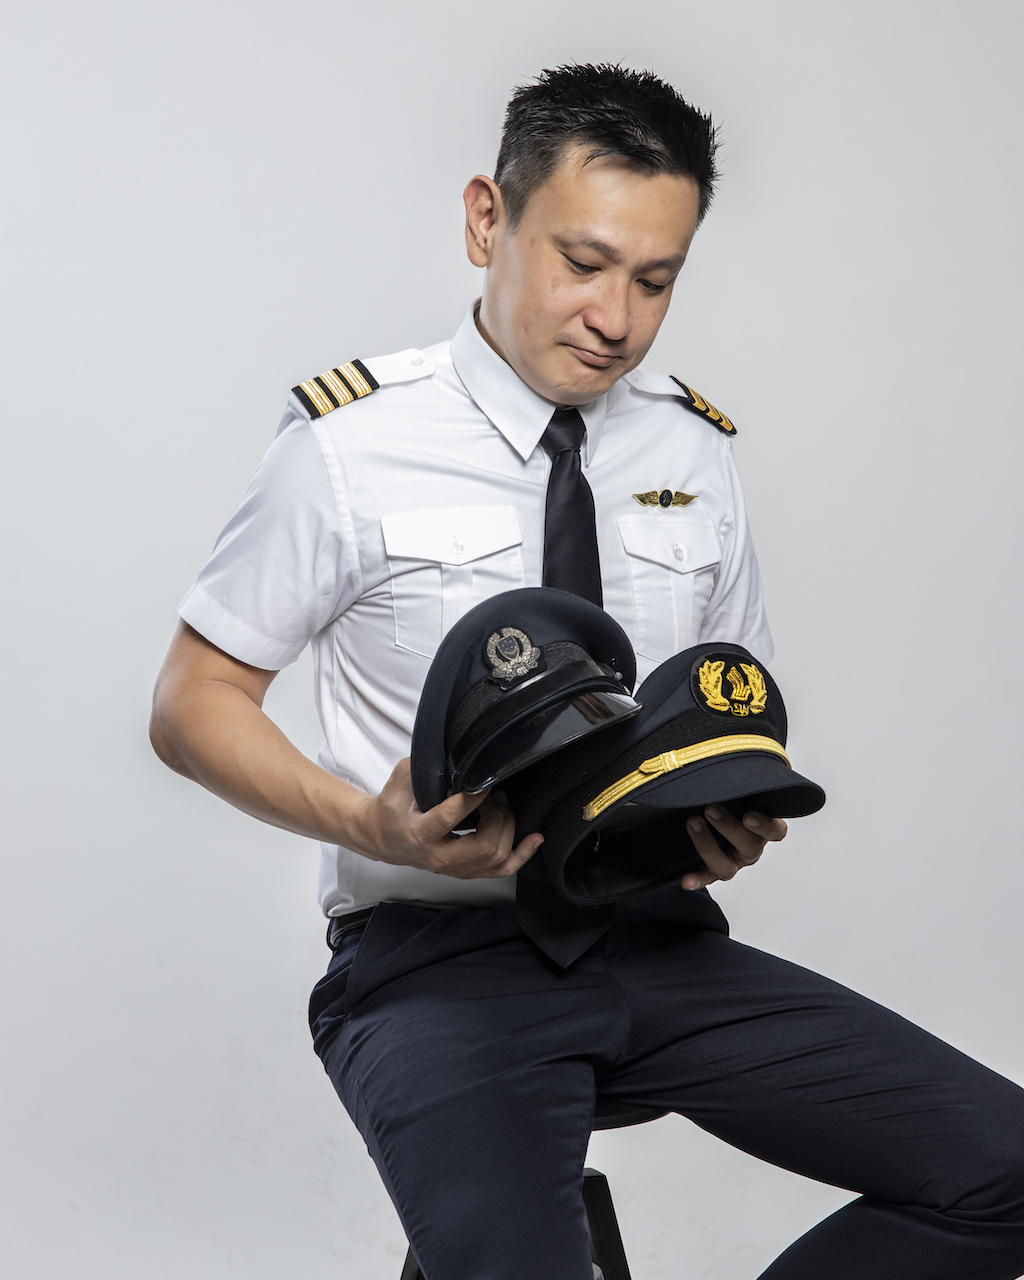 Do you have what it takes for a career in the skies? Visit singaporeair.com/cadet-pilots-career to find out how you can join us as a pilot